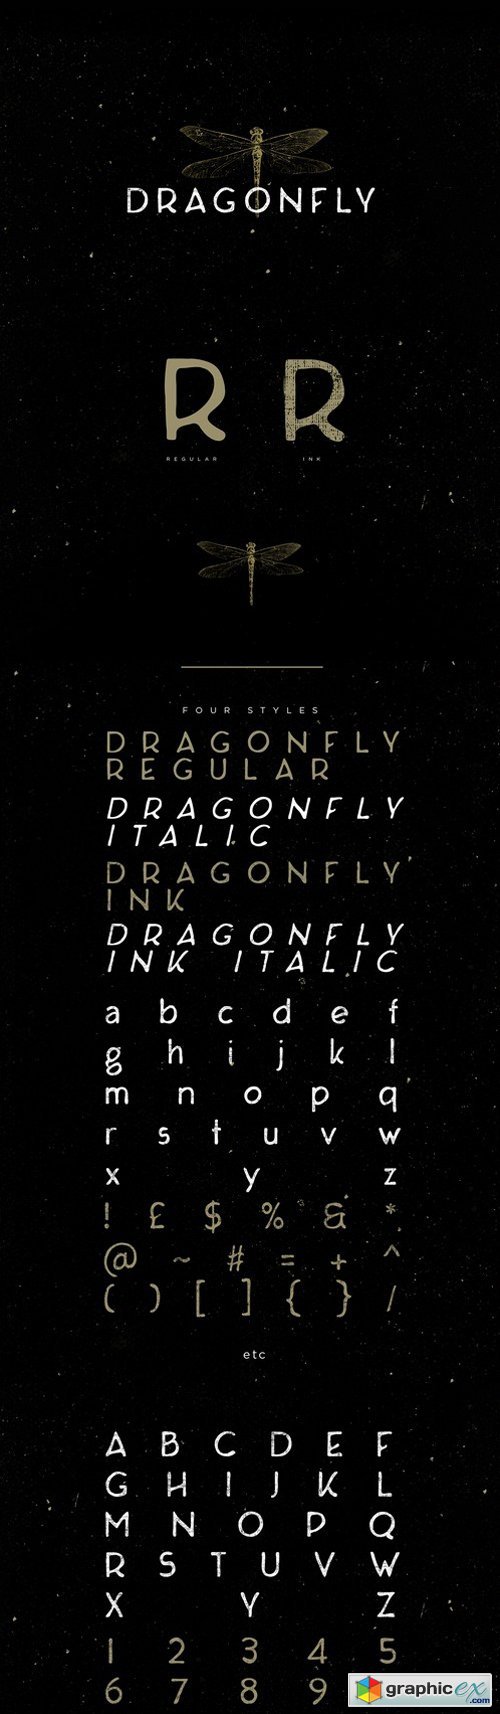 Dragonfly Typeface